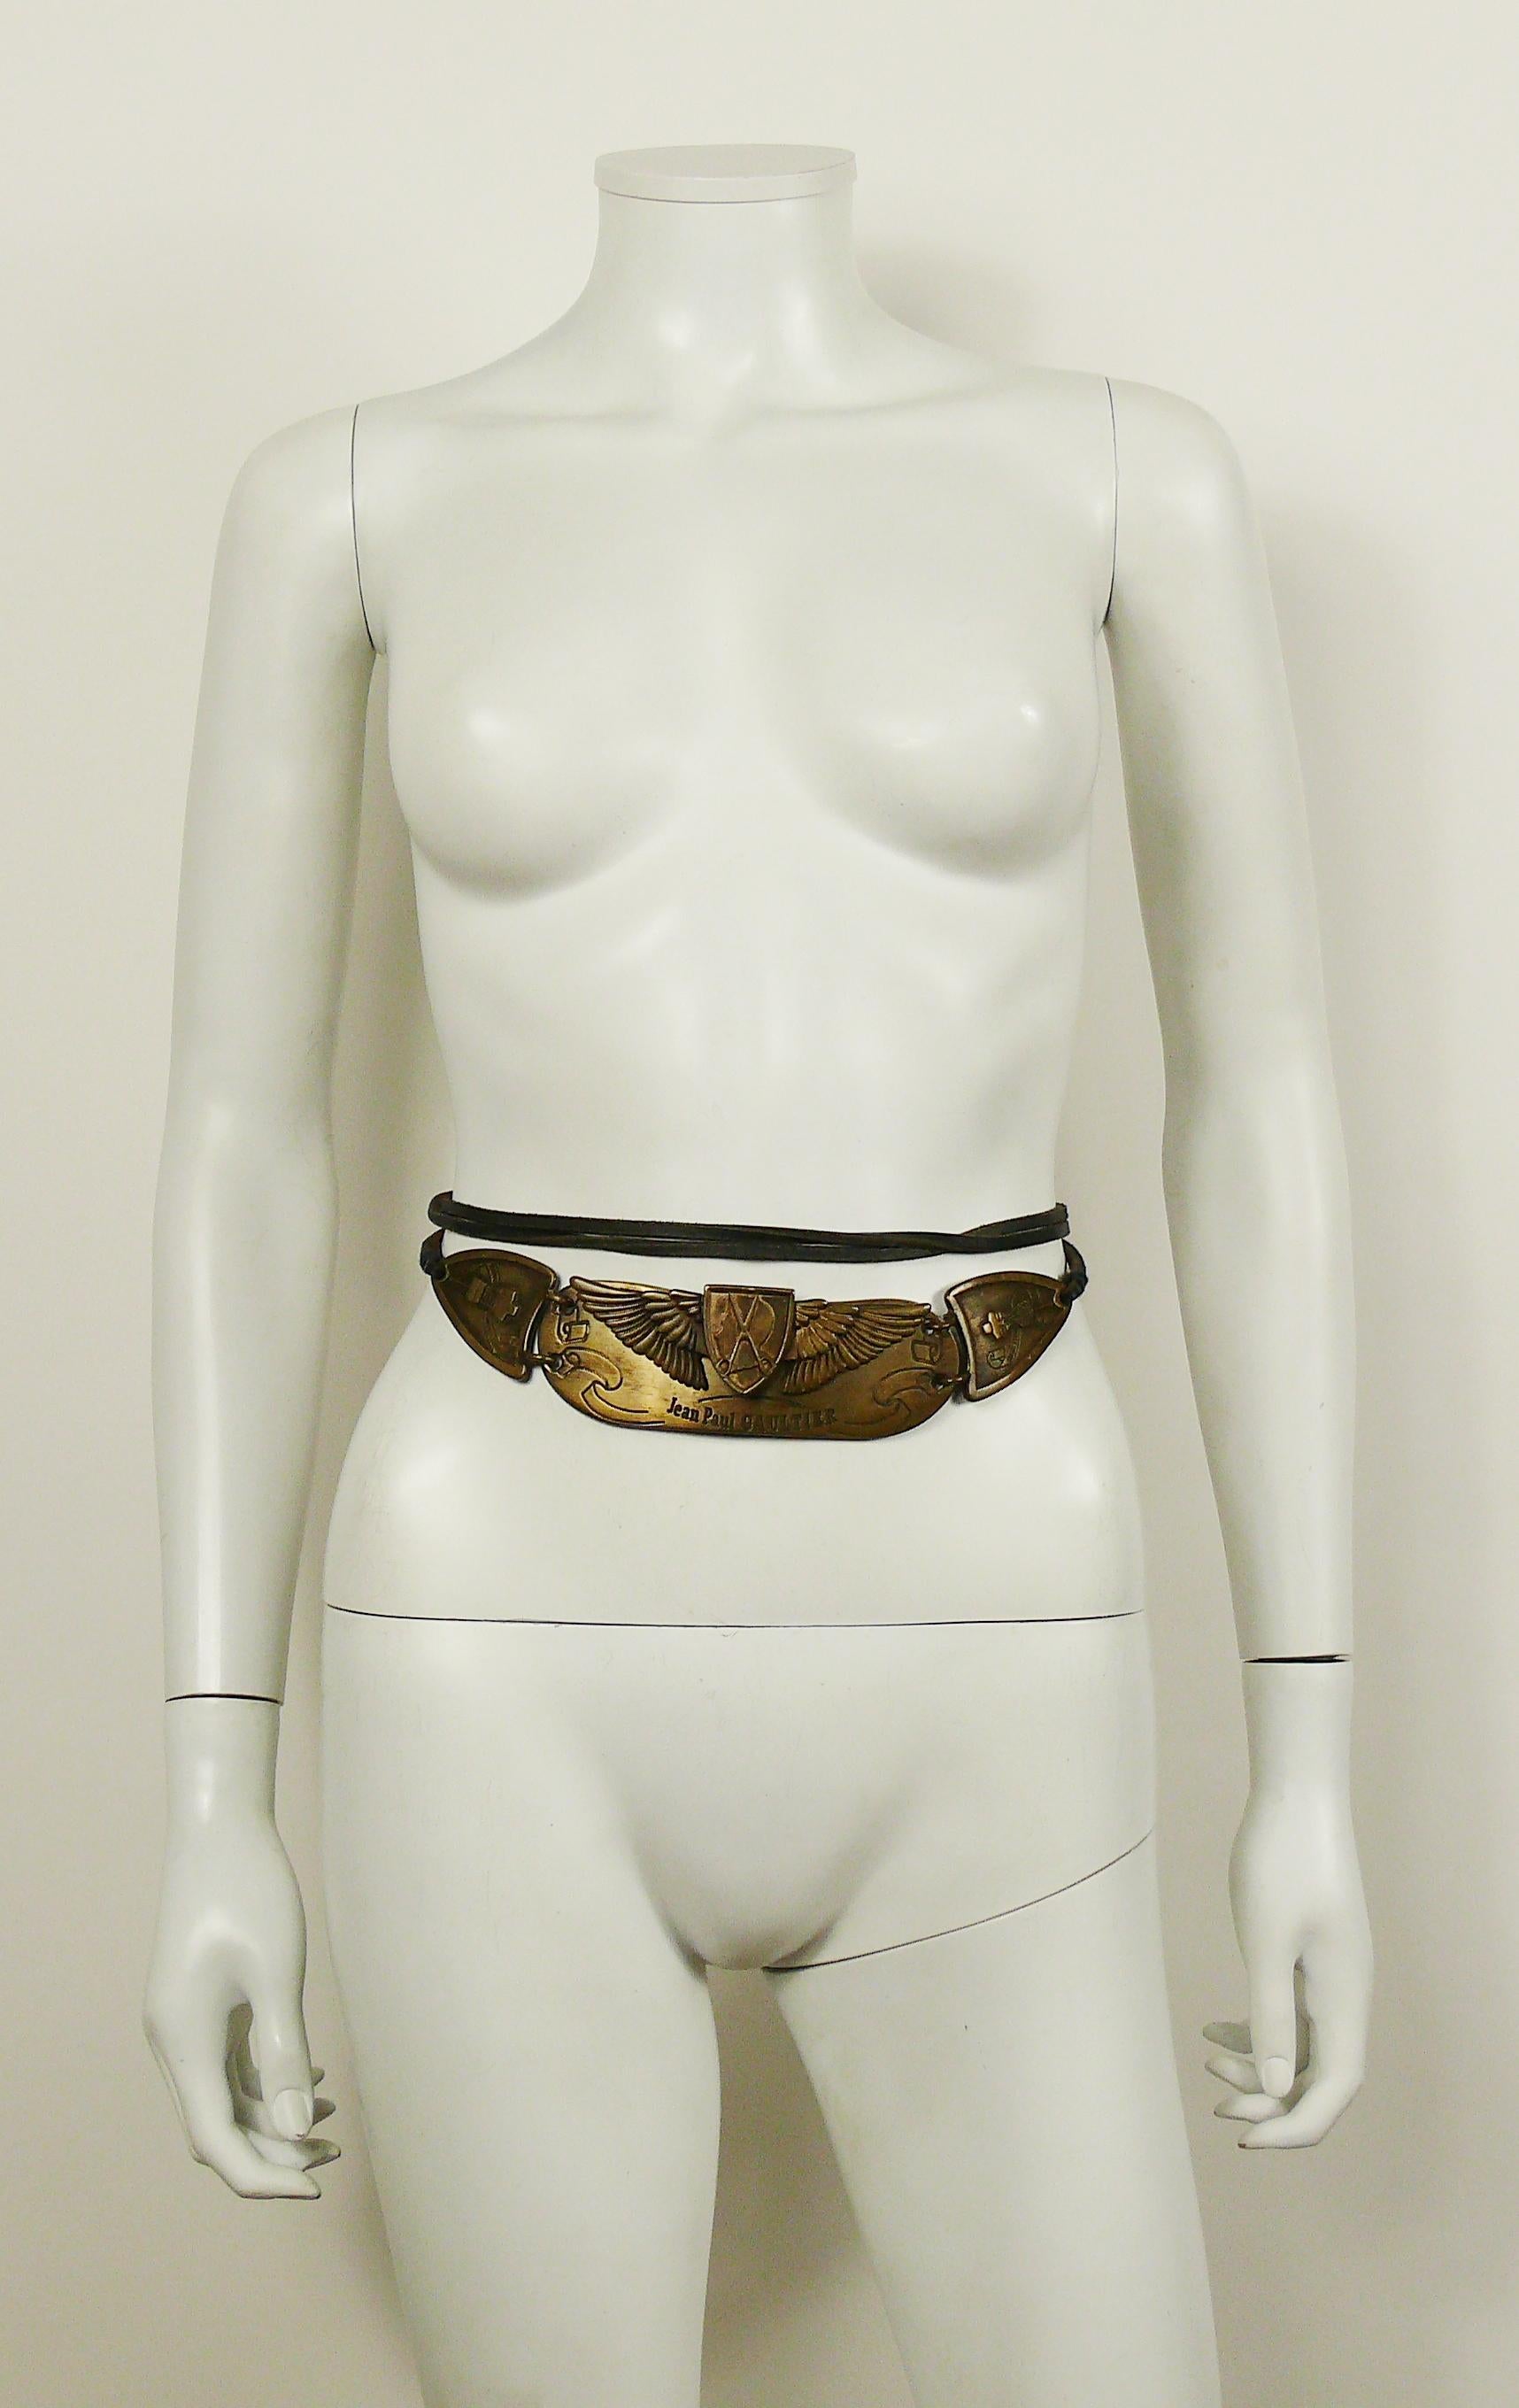 JEAN PAUL GAULTIER antiqued bronze toned belt featuring a 3-D buckle, featuring JEAN PAUL GAULTIER profile with sewing attributes.

Black leather straps.

Limited edition belt edited on the occasion of the 25th anniversary of the House of JEAN PAUL